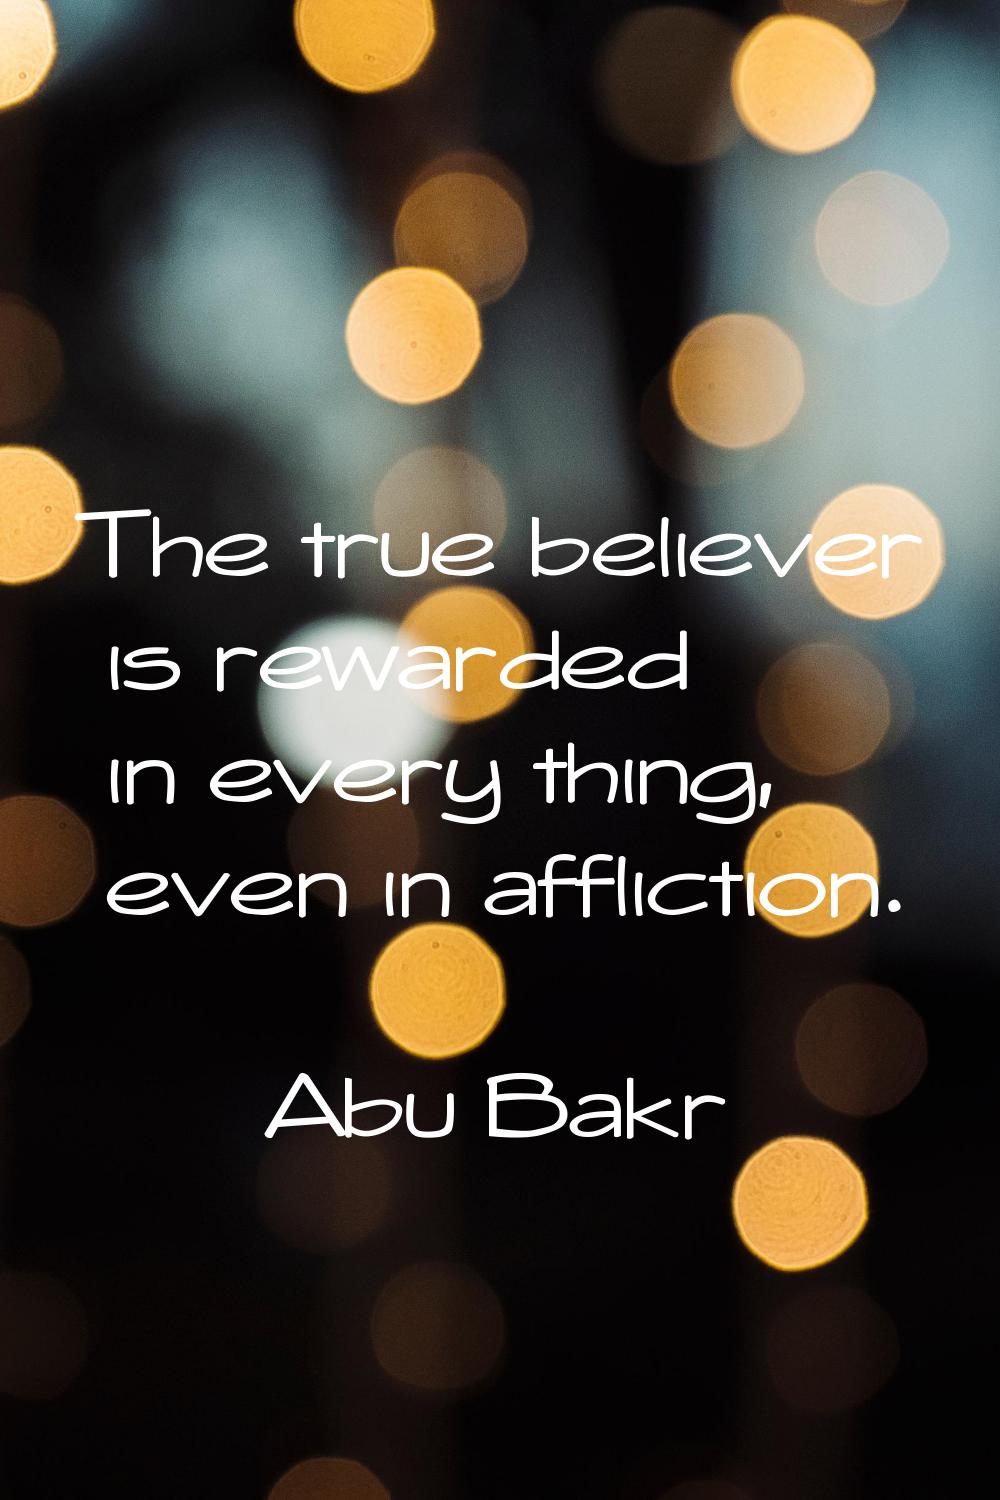 The true believer is rewarded in every thing, even in affliction.